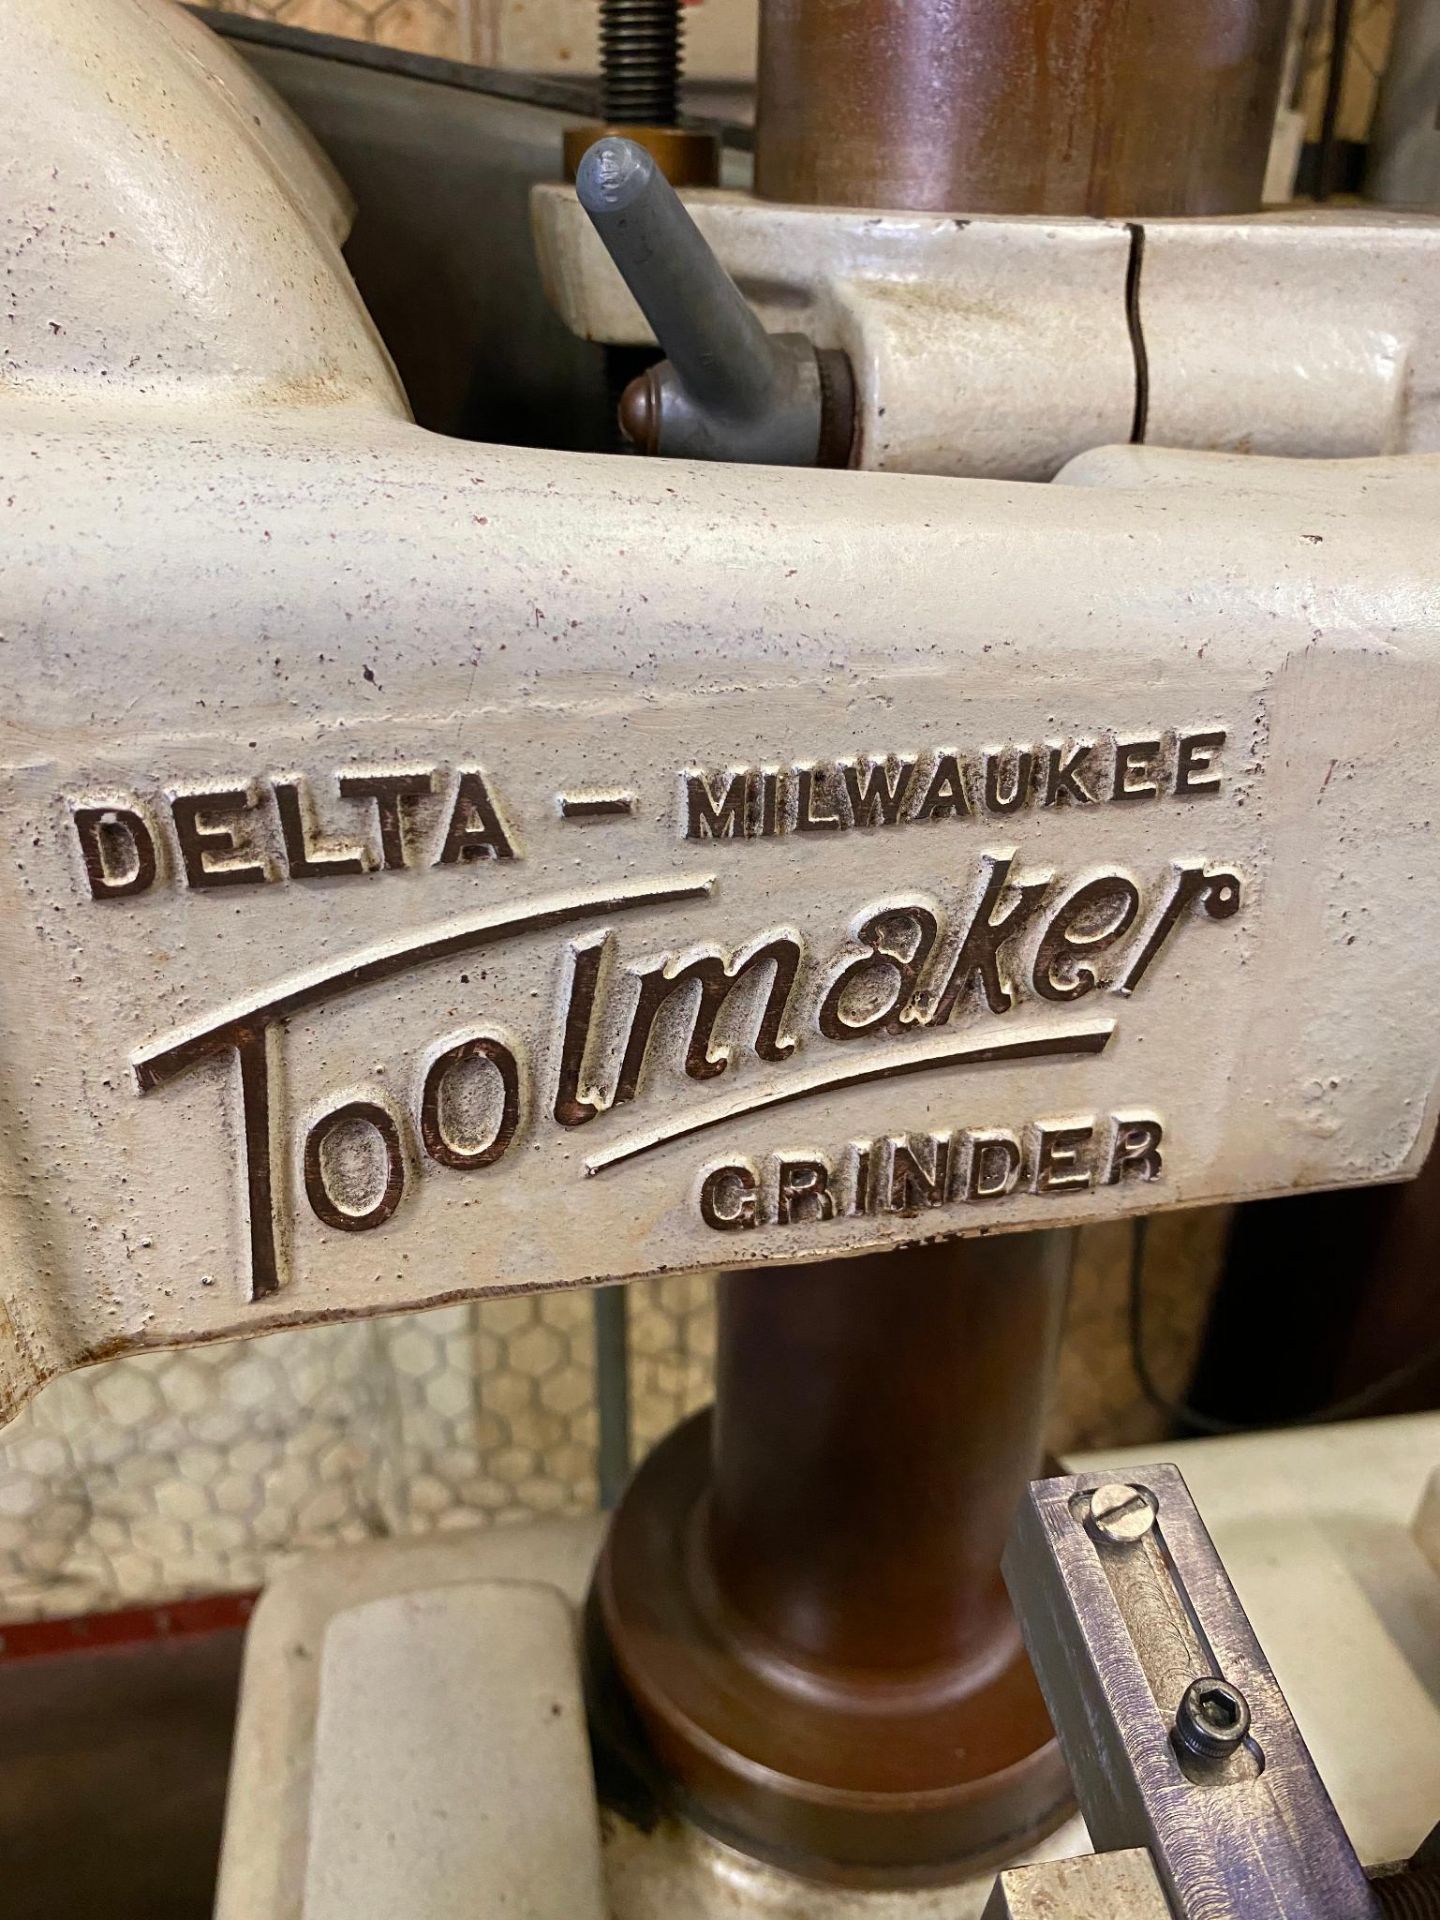 TOOL MAKER/ GRINDER, DELTA MILWAUKEE, tbl. type, S/N 30-378 (Located at: P & M Machine, Private Road - Image 2 of 4